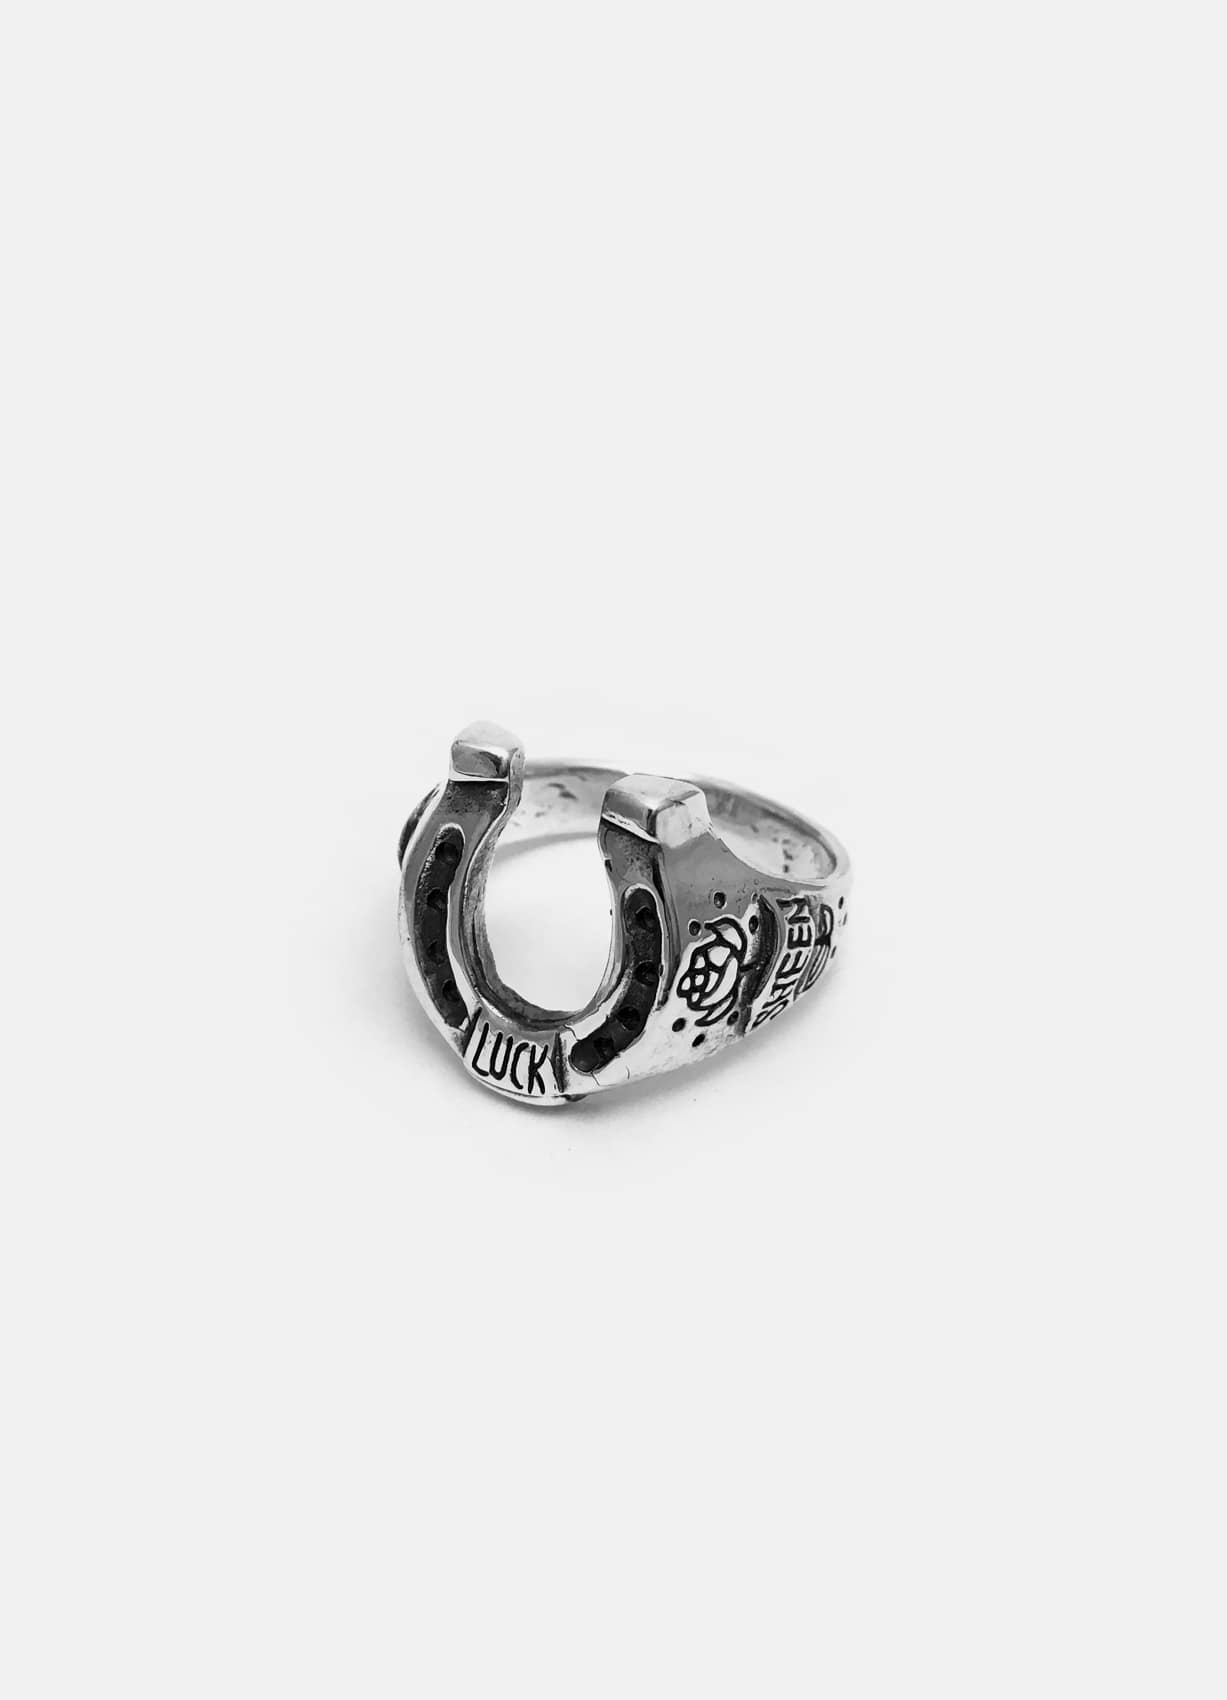 Horse Shoe MID Ring